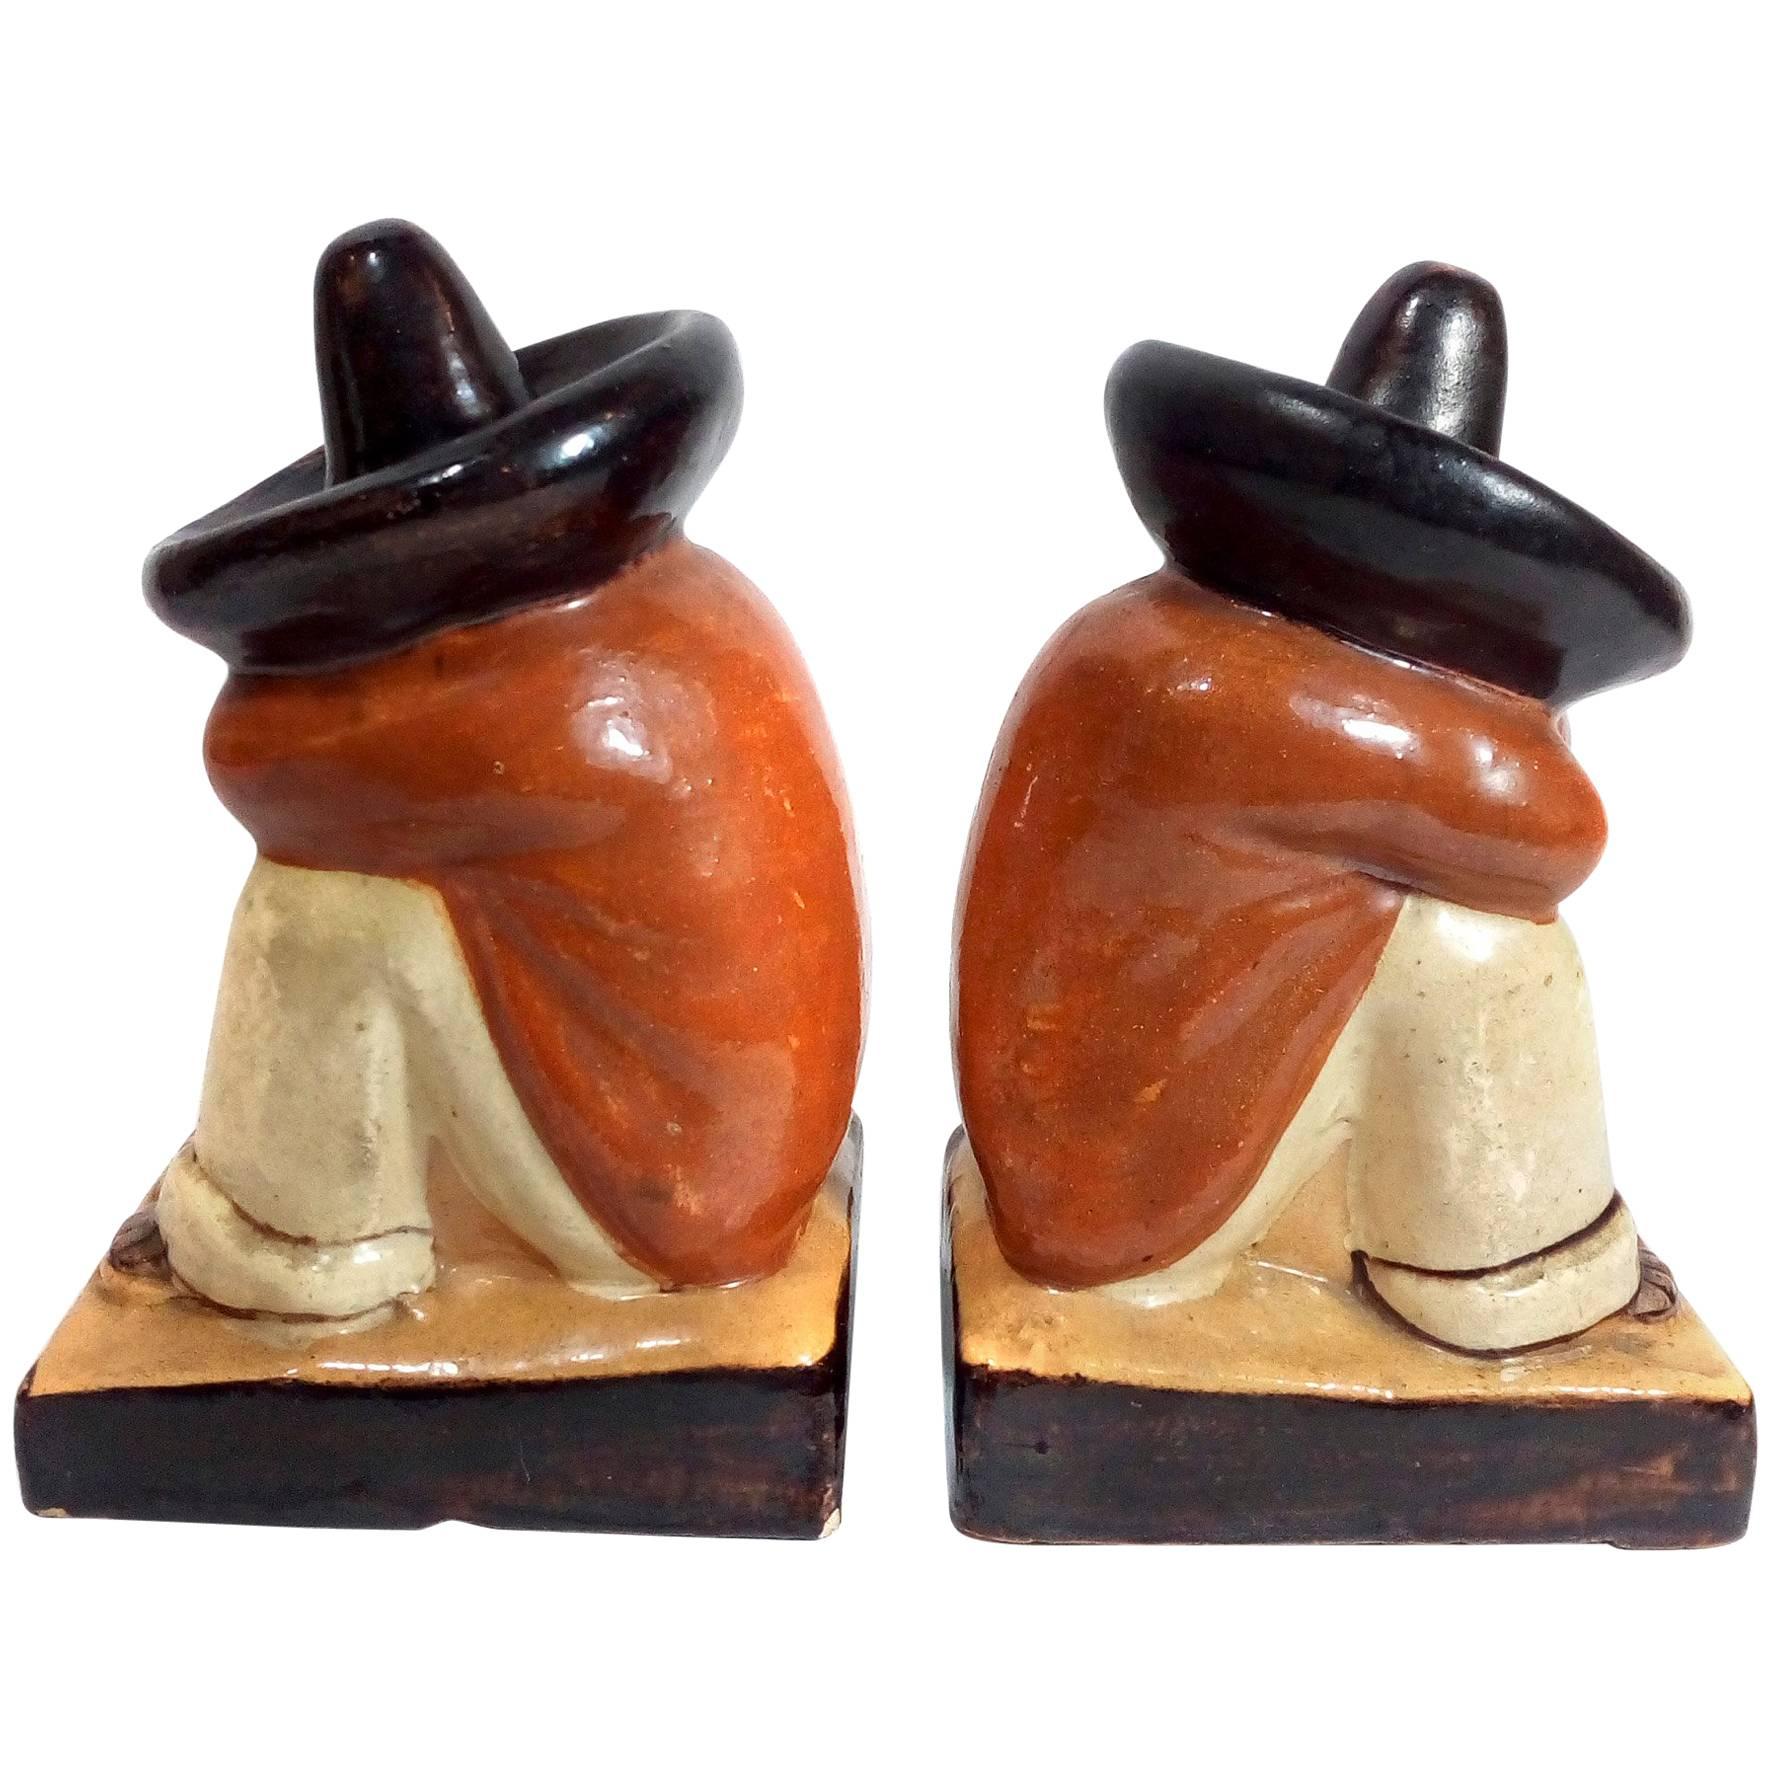 Pair of Ceramic Mexican Bookends